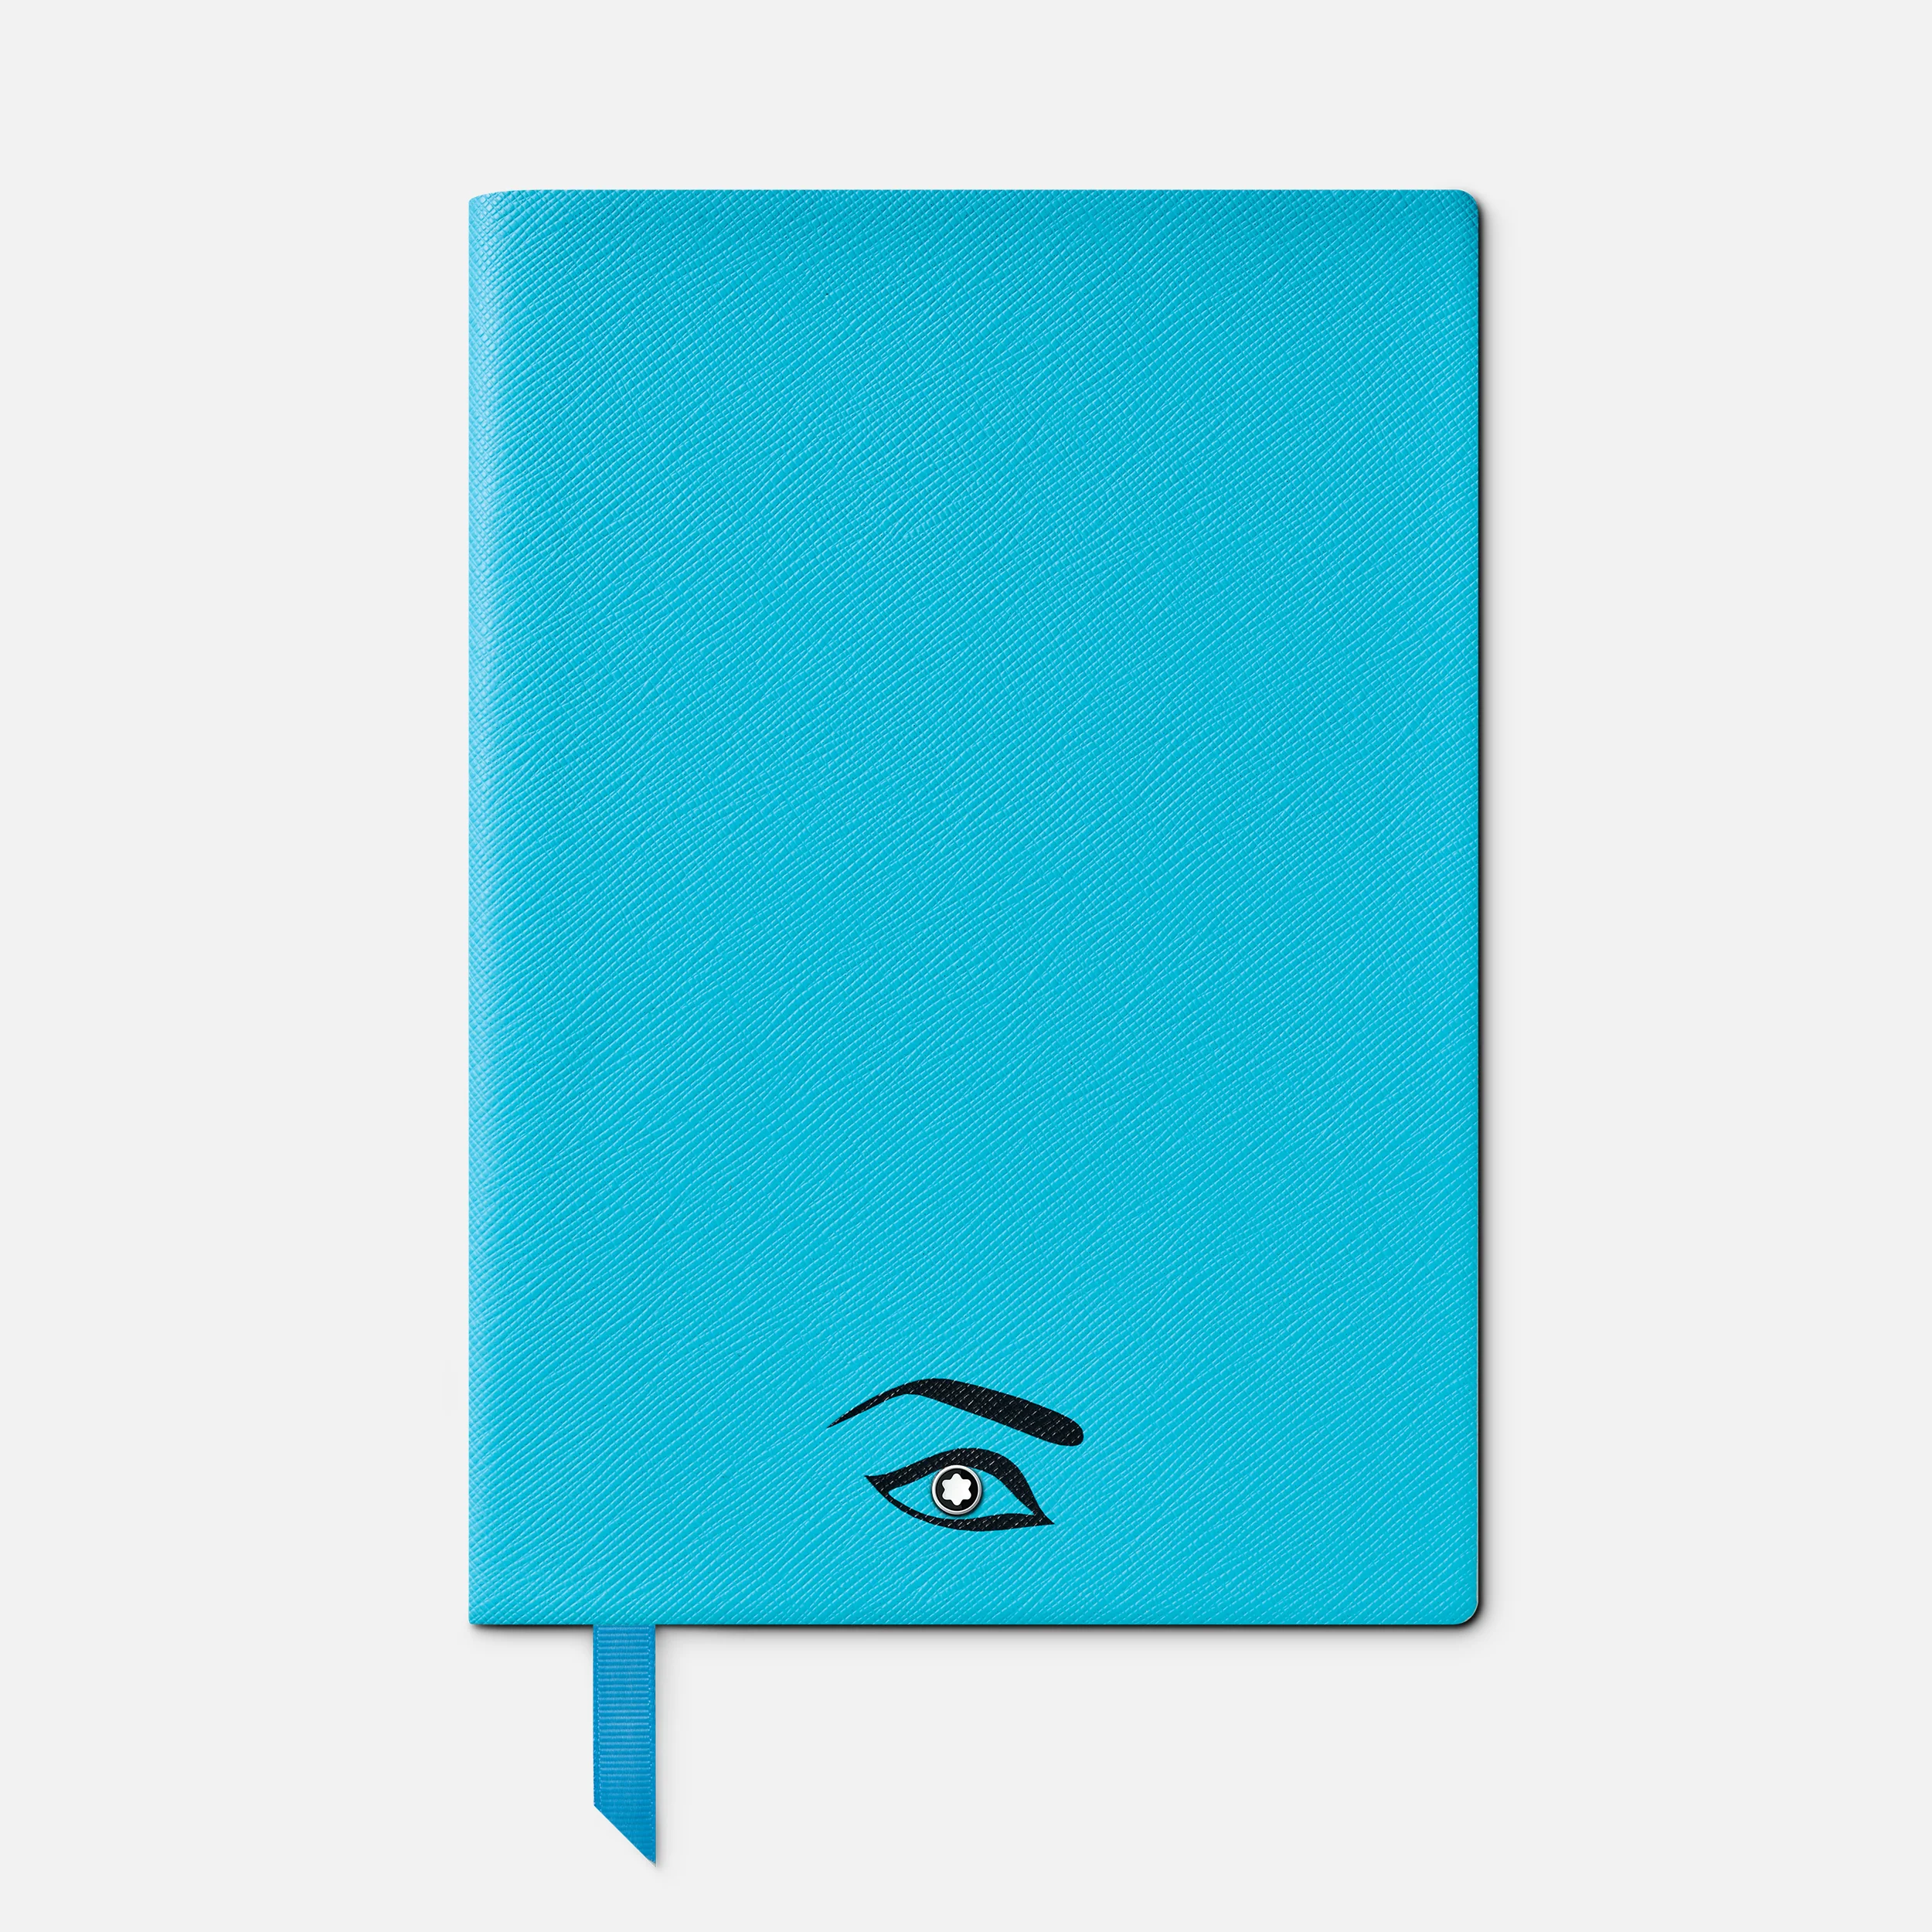 Montblanc Notebook #146 Small, Muses Maria Callas, Blue Lined - Pencraft the boutique